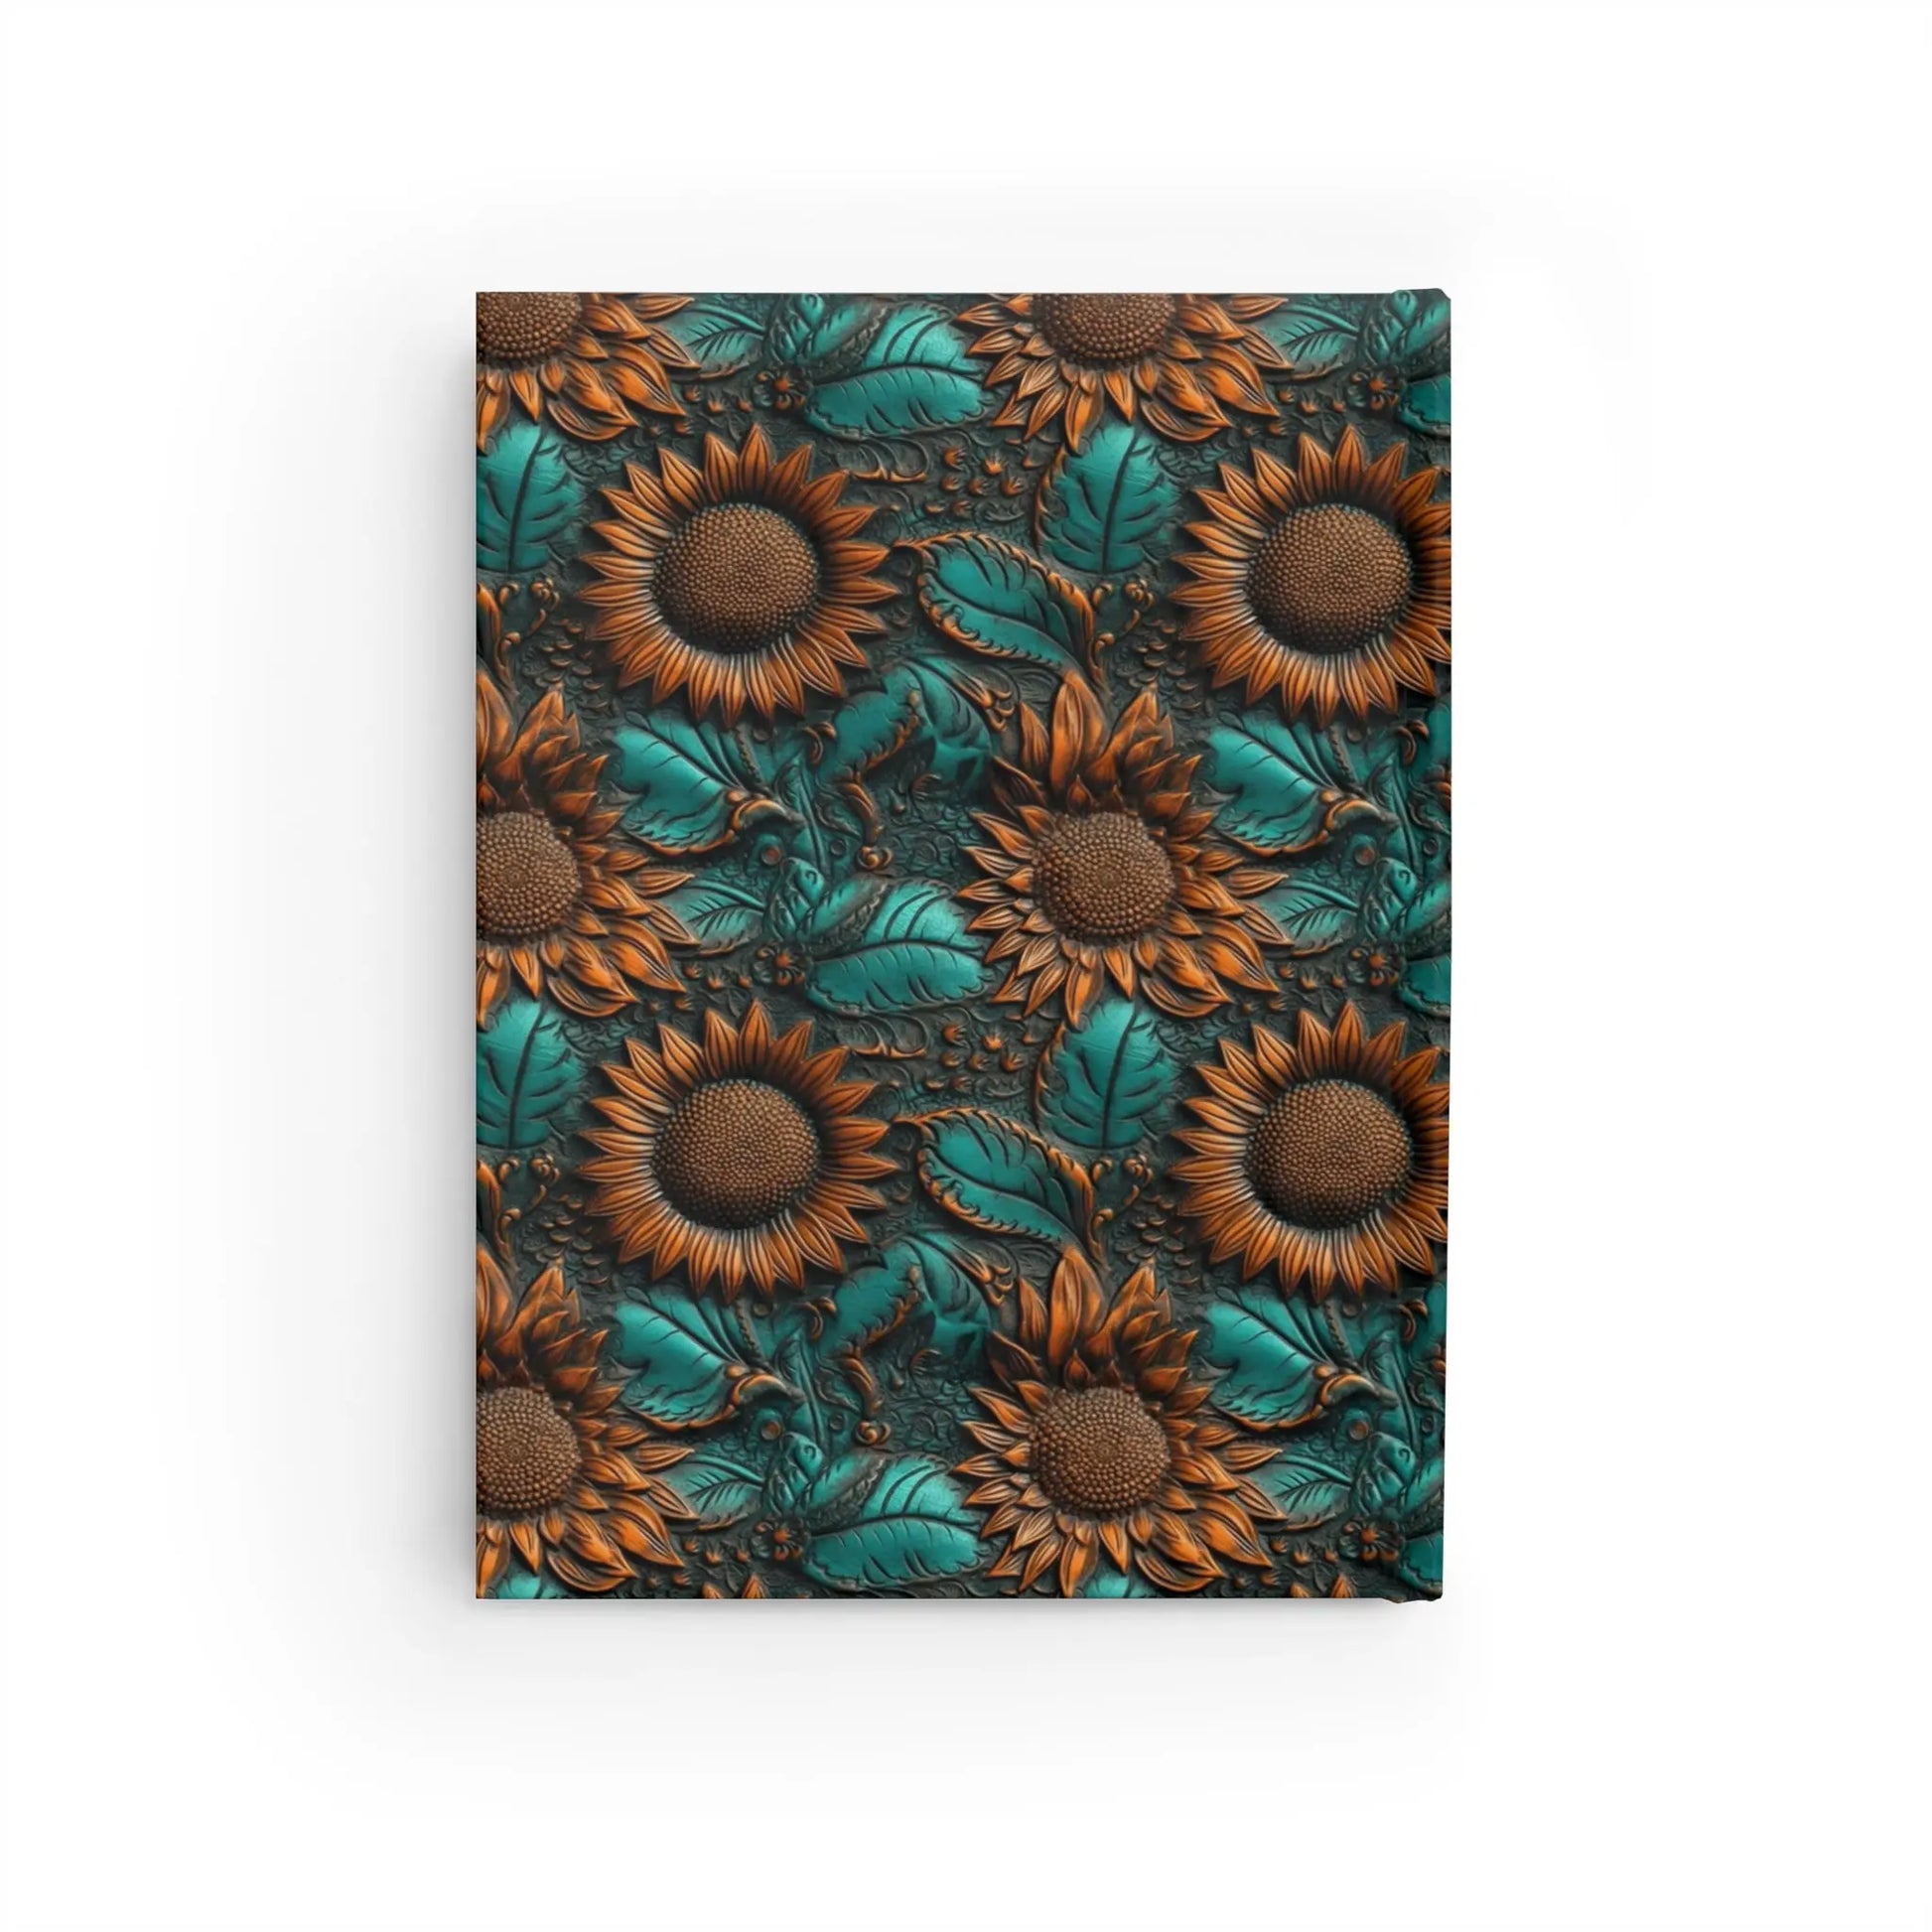 Church Notes Journal  - Personalized  - Sunflower Leather Look Printify